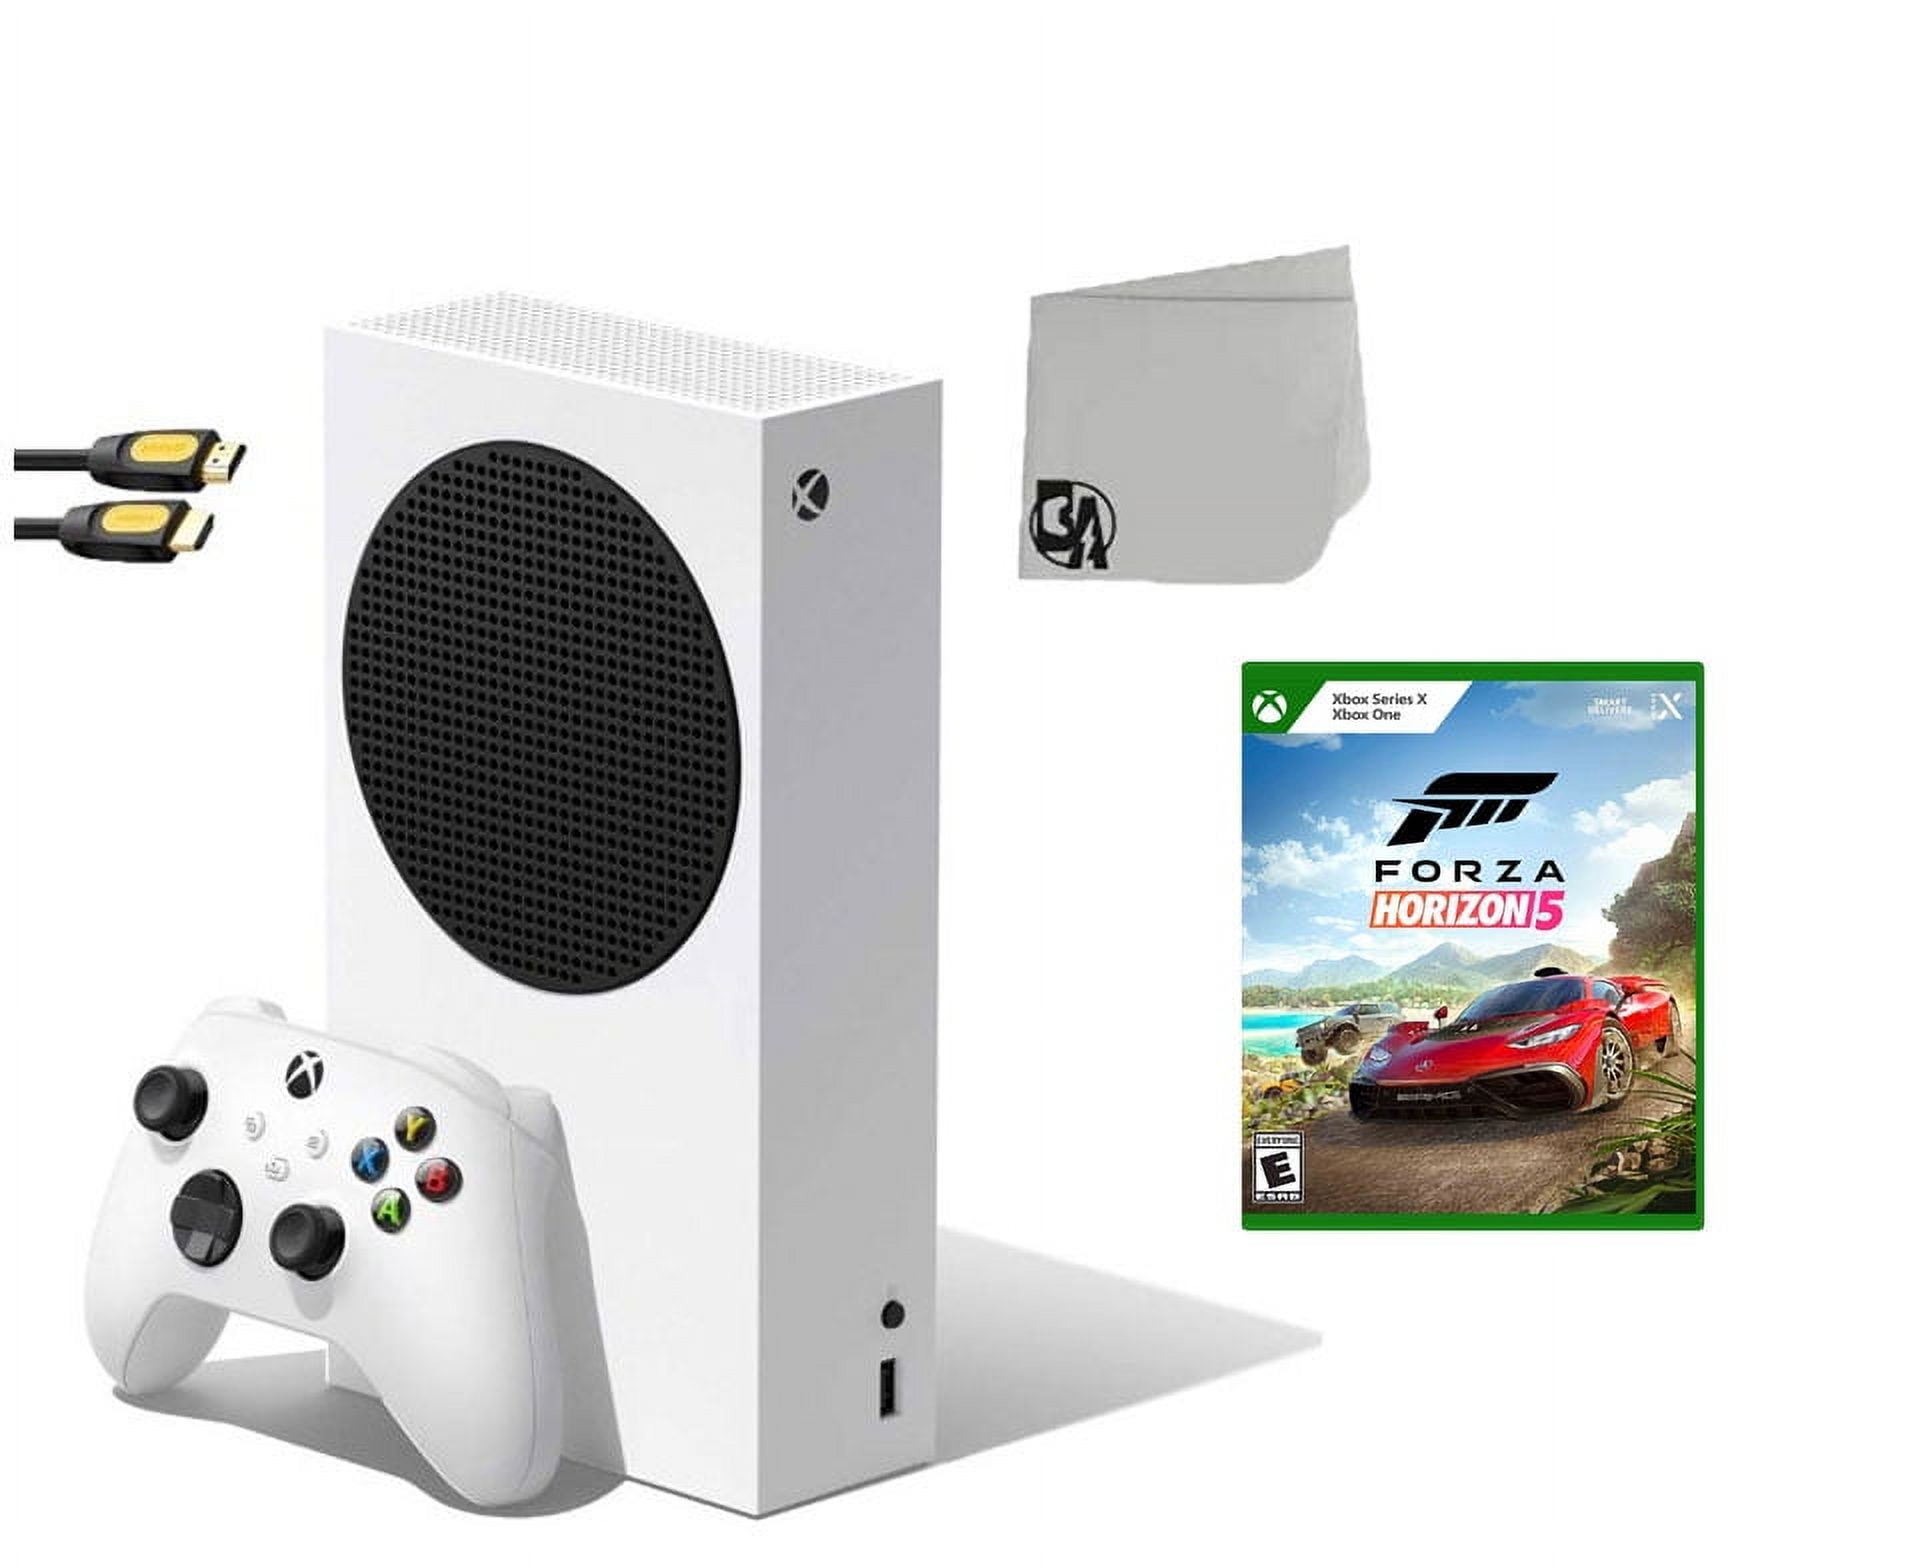 Deal Alert: Save $50 Off the Xbox Series X Forza Horizon 5 Console Bundle -  IGN